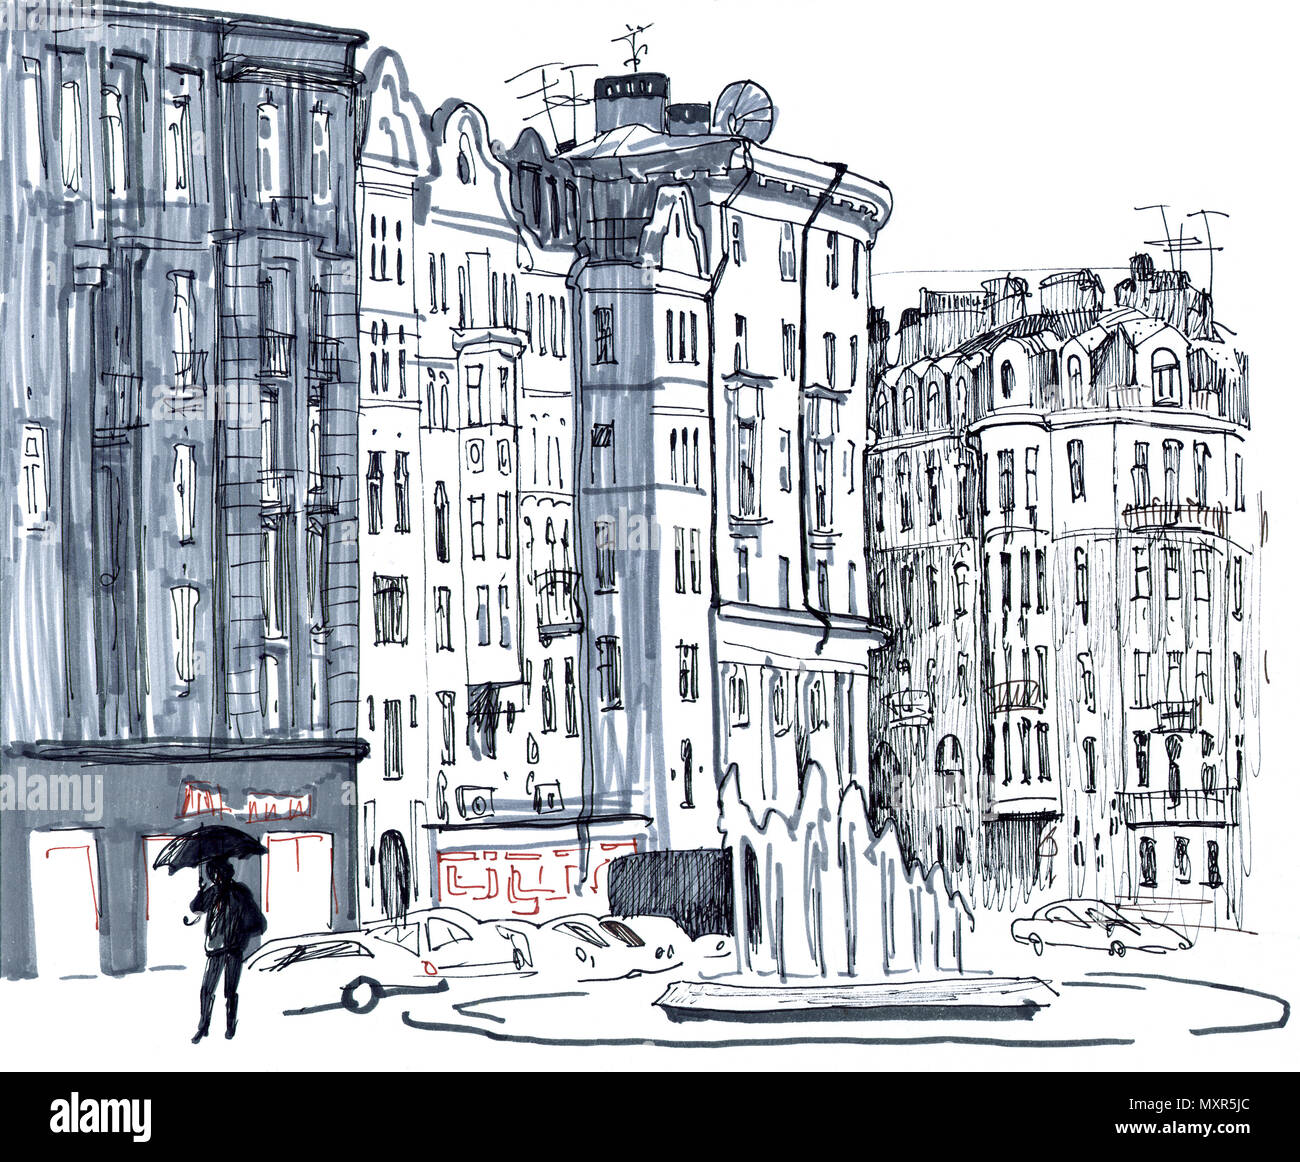 City scene. Sketchy style hand drawn marker pen illustration in shades of gray. Rainy day, old houses, street, fountain, cars, human figure with umbrella. Saint Petersburg, Russia. Stock Photo